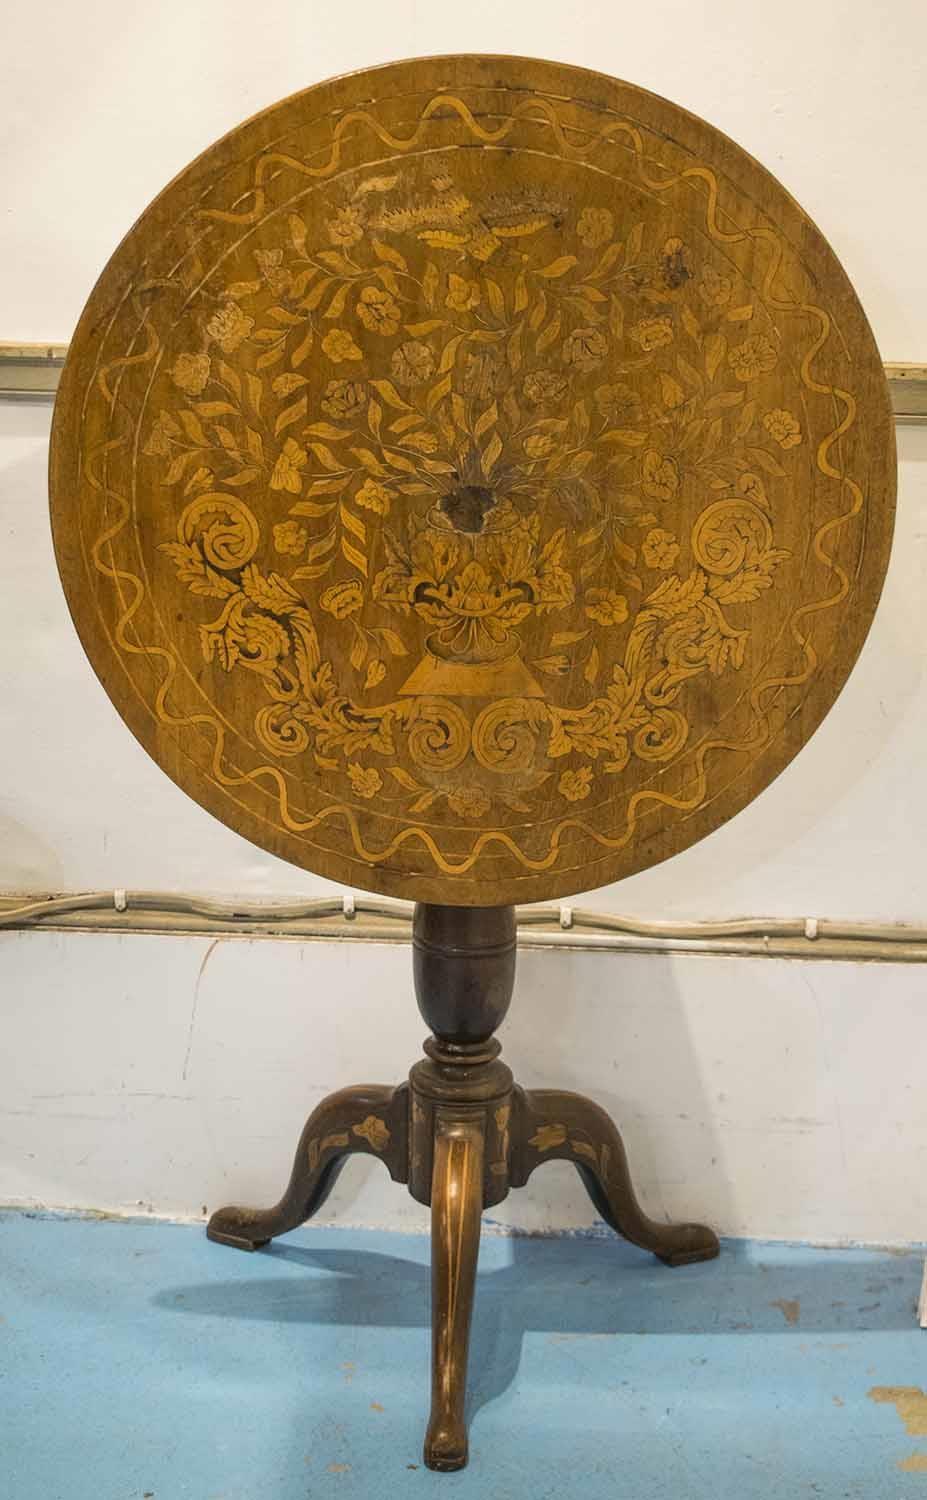 TRIPOD TABLE, 18th century Dutch mahogany and floral marquetry with circular tilt top, 74cm H x 72cm